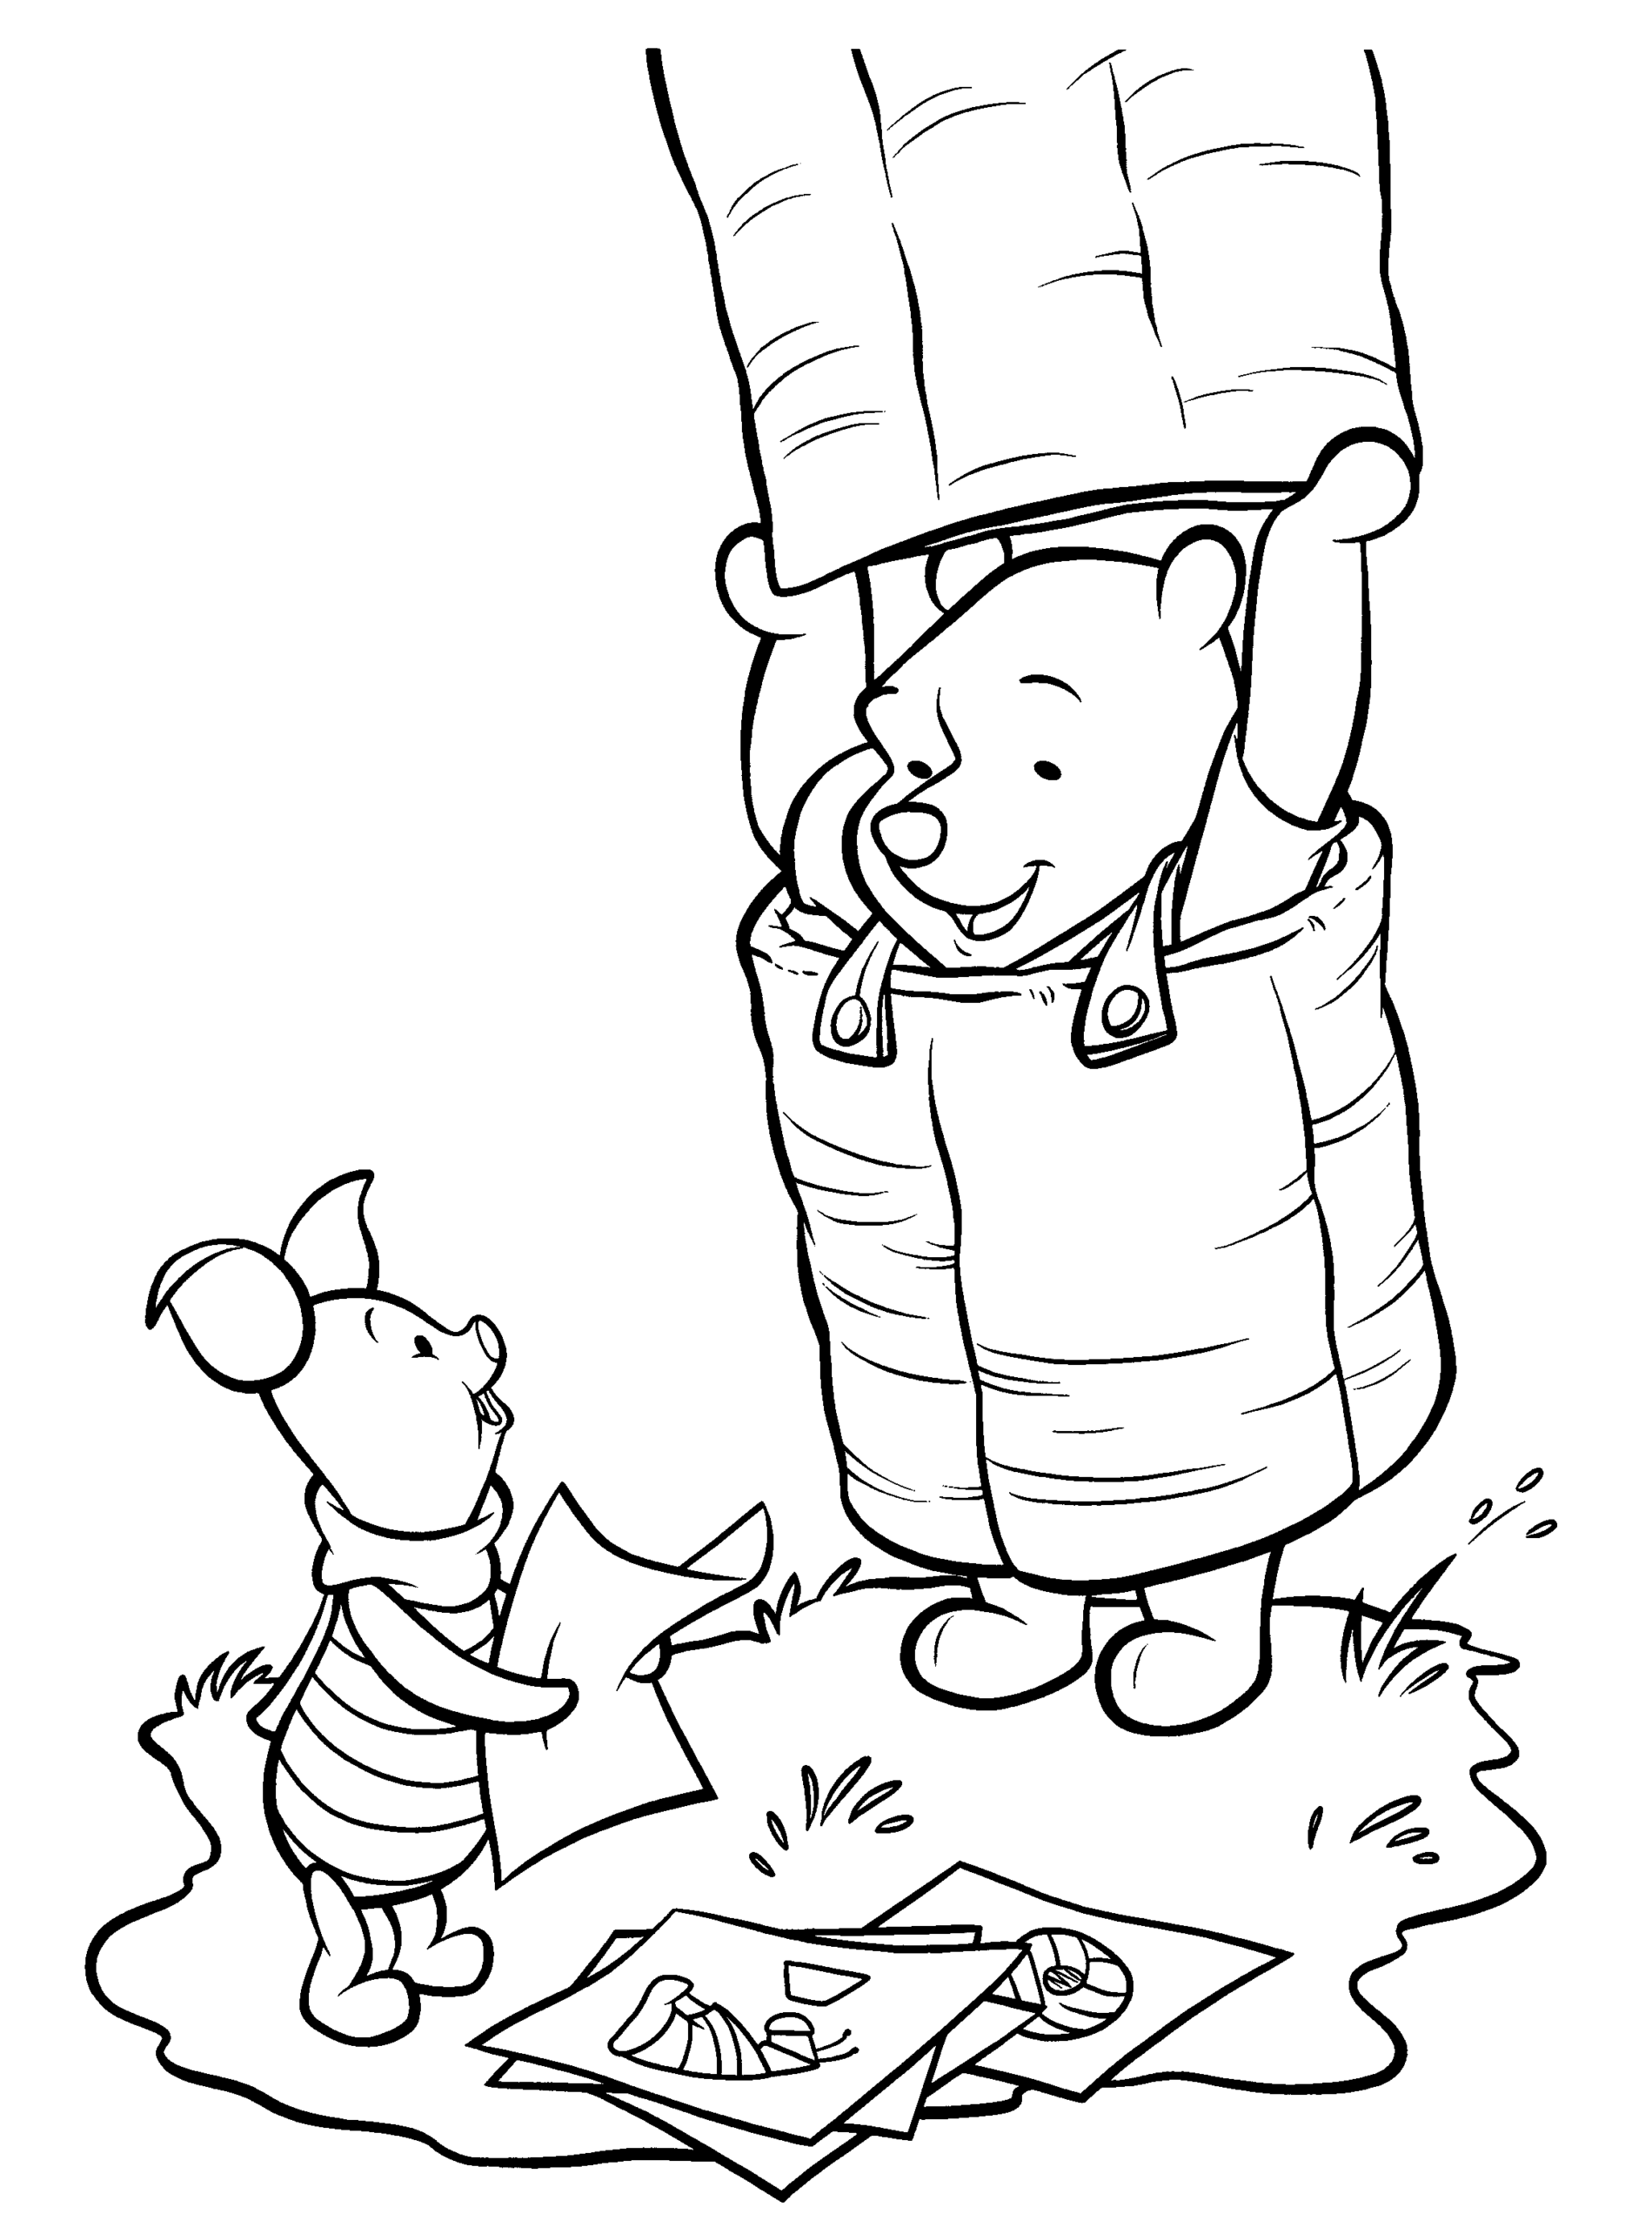 Winnie the Pooh Coloring Pages Cartoons winnie the pooh 30 Printable 2020 7135 Coloring4free